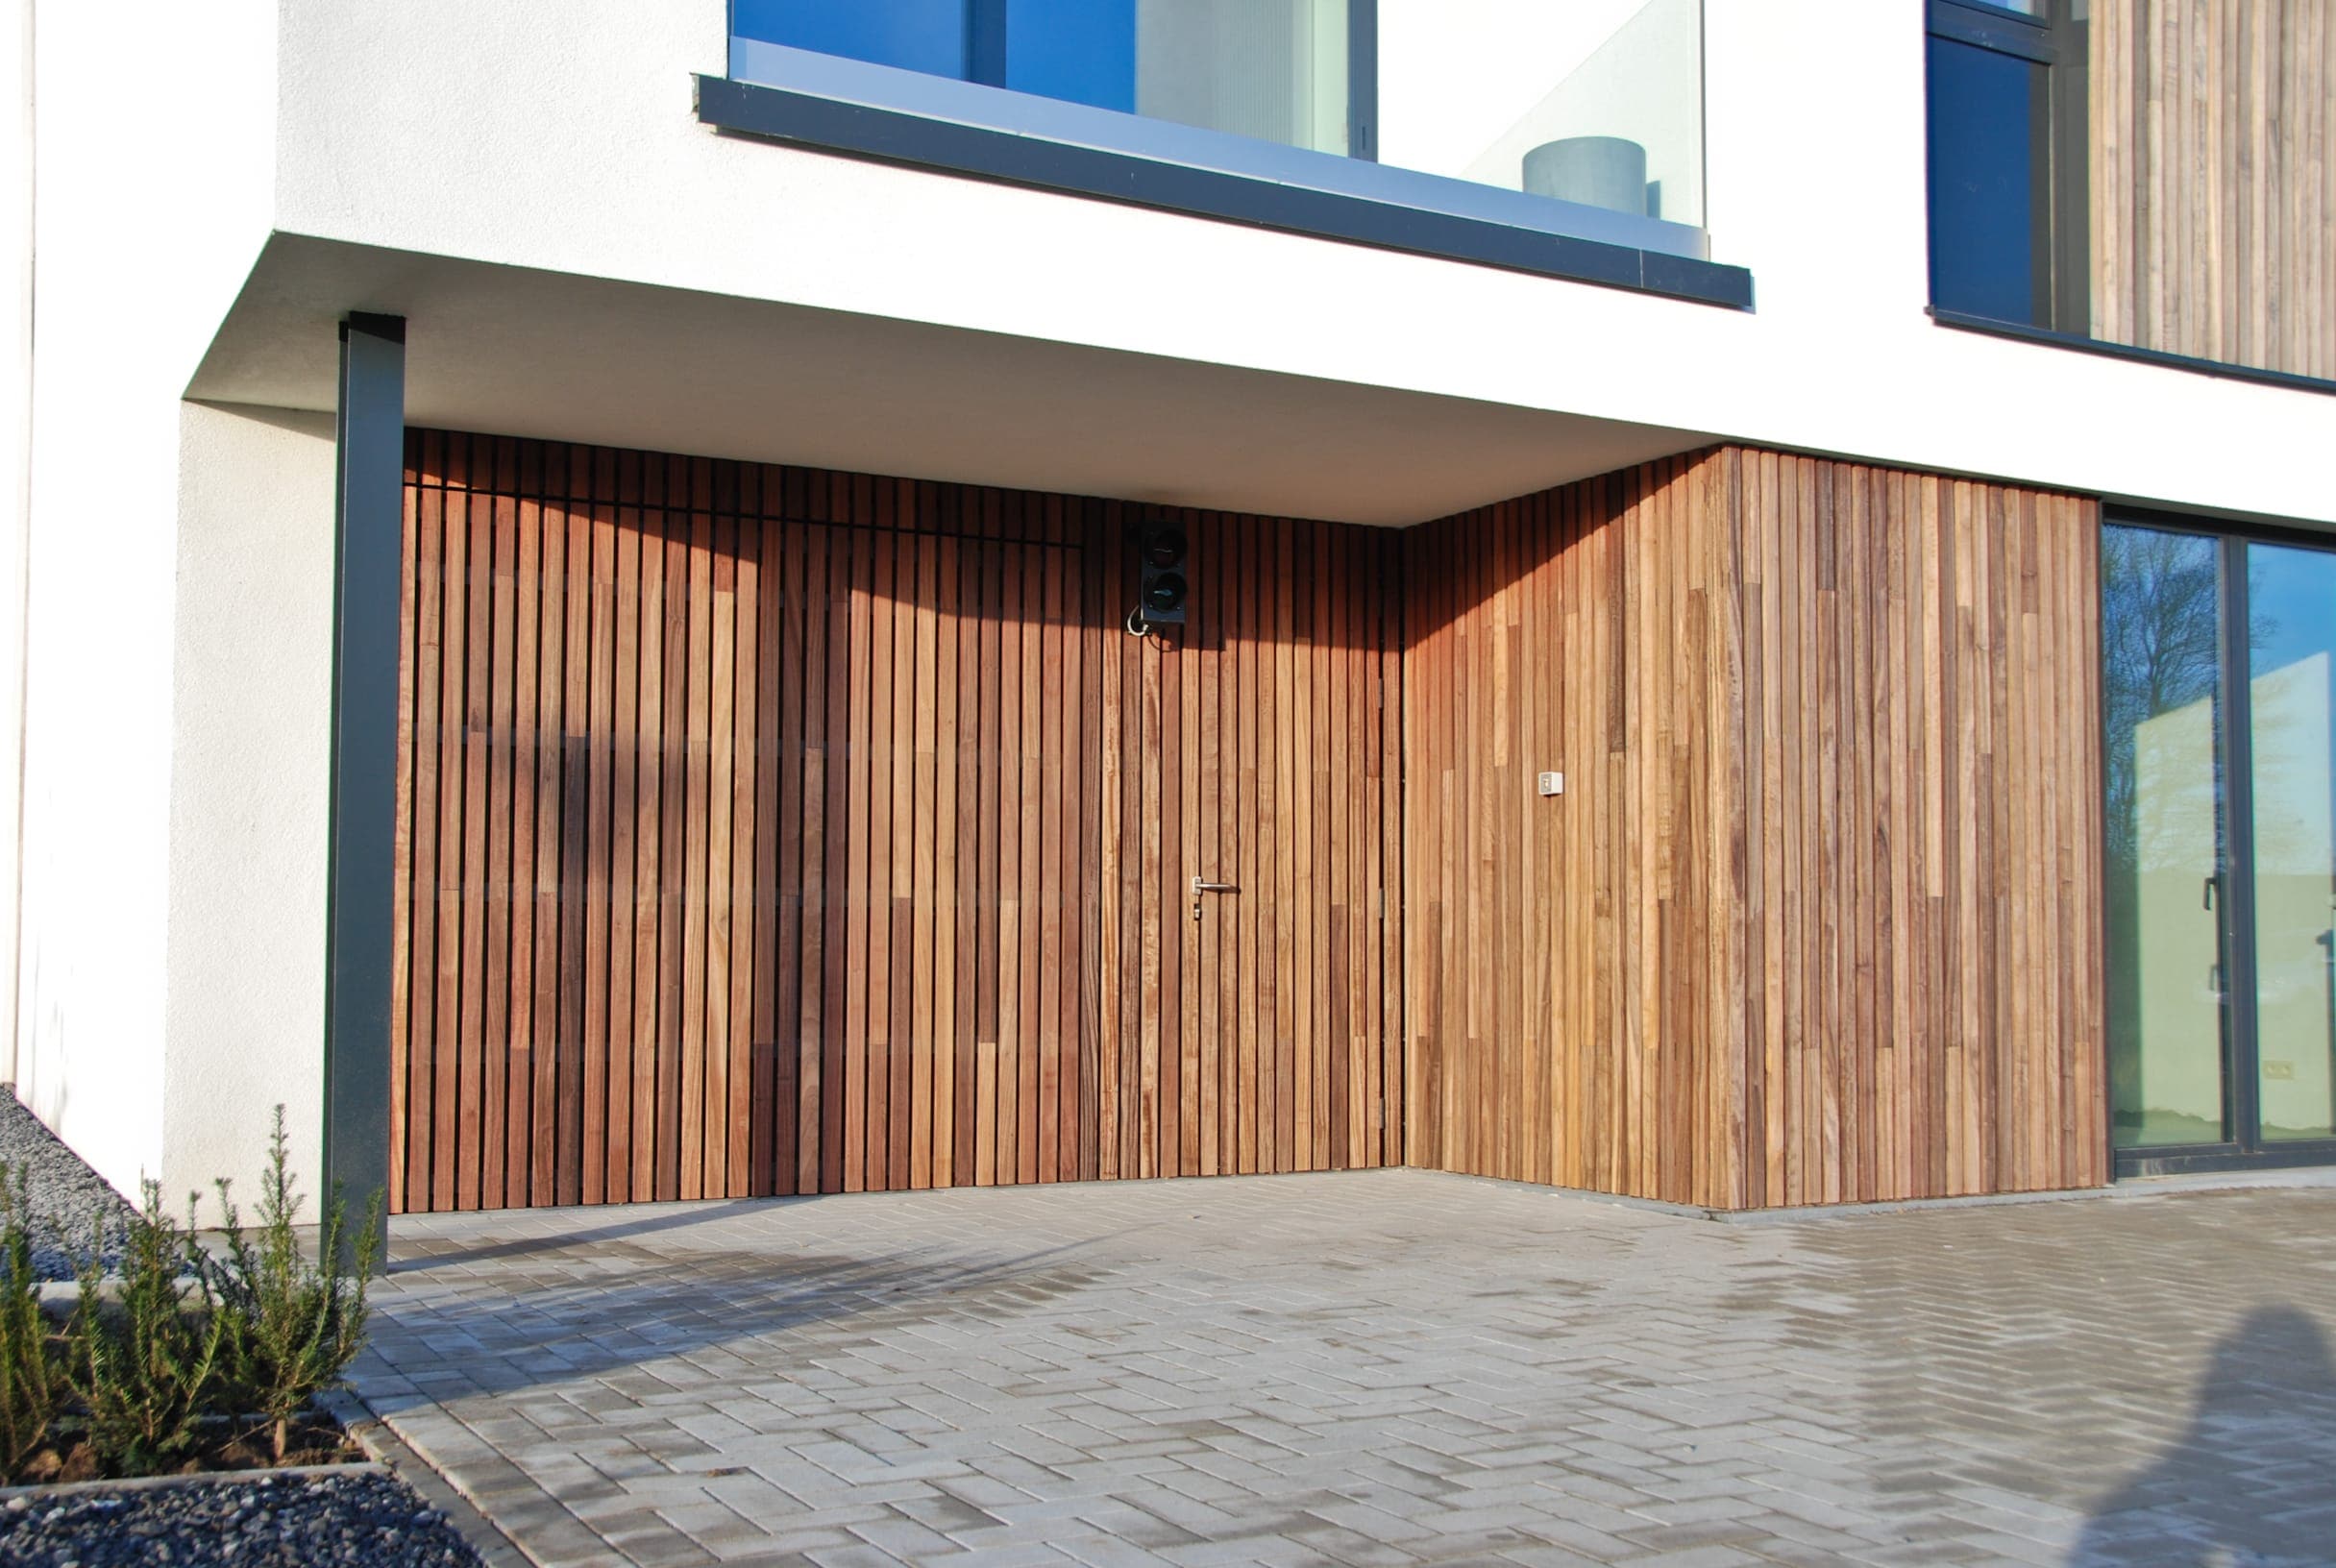 Bardage en bois padouk Incredible wood cladding with padauk on building in belgium with a garage door in wood cladding without visible fixations vetedy techniclic